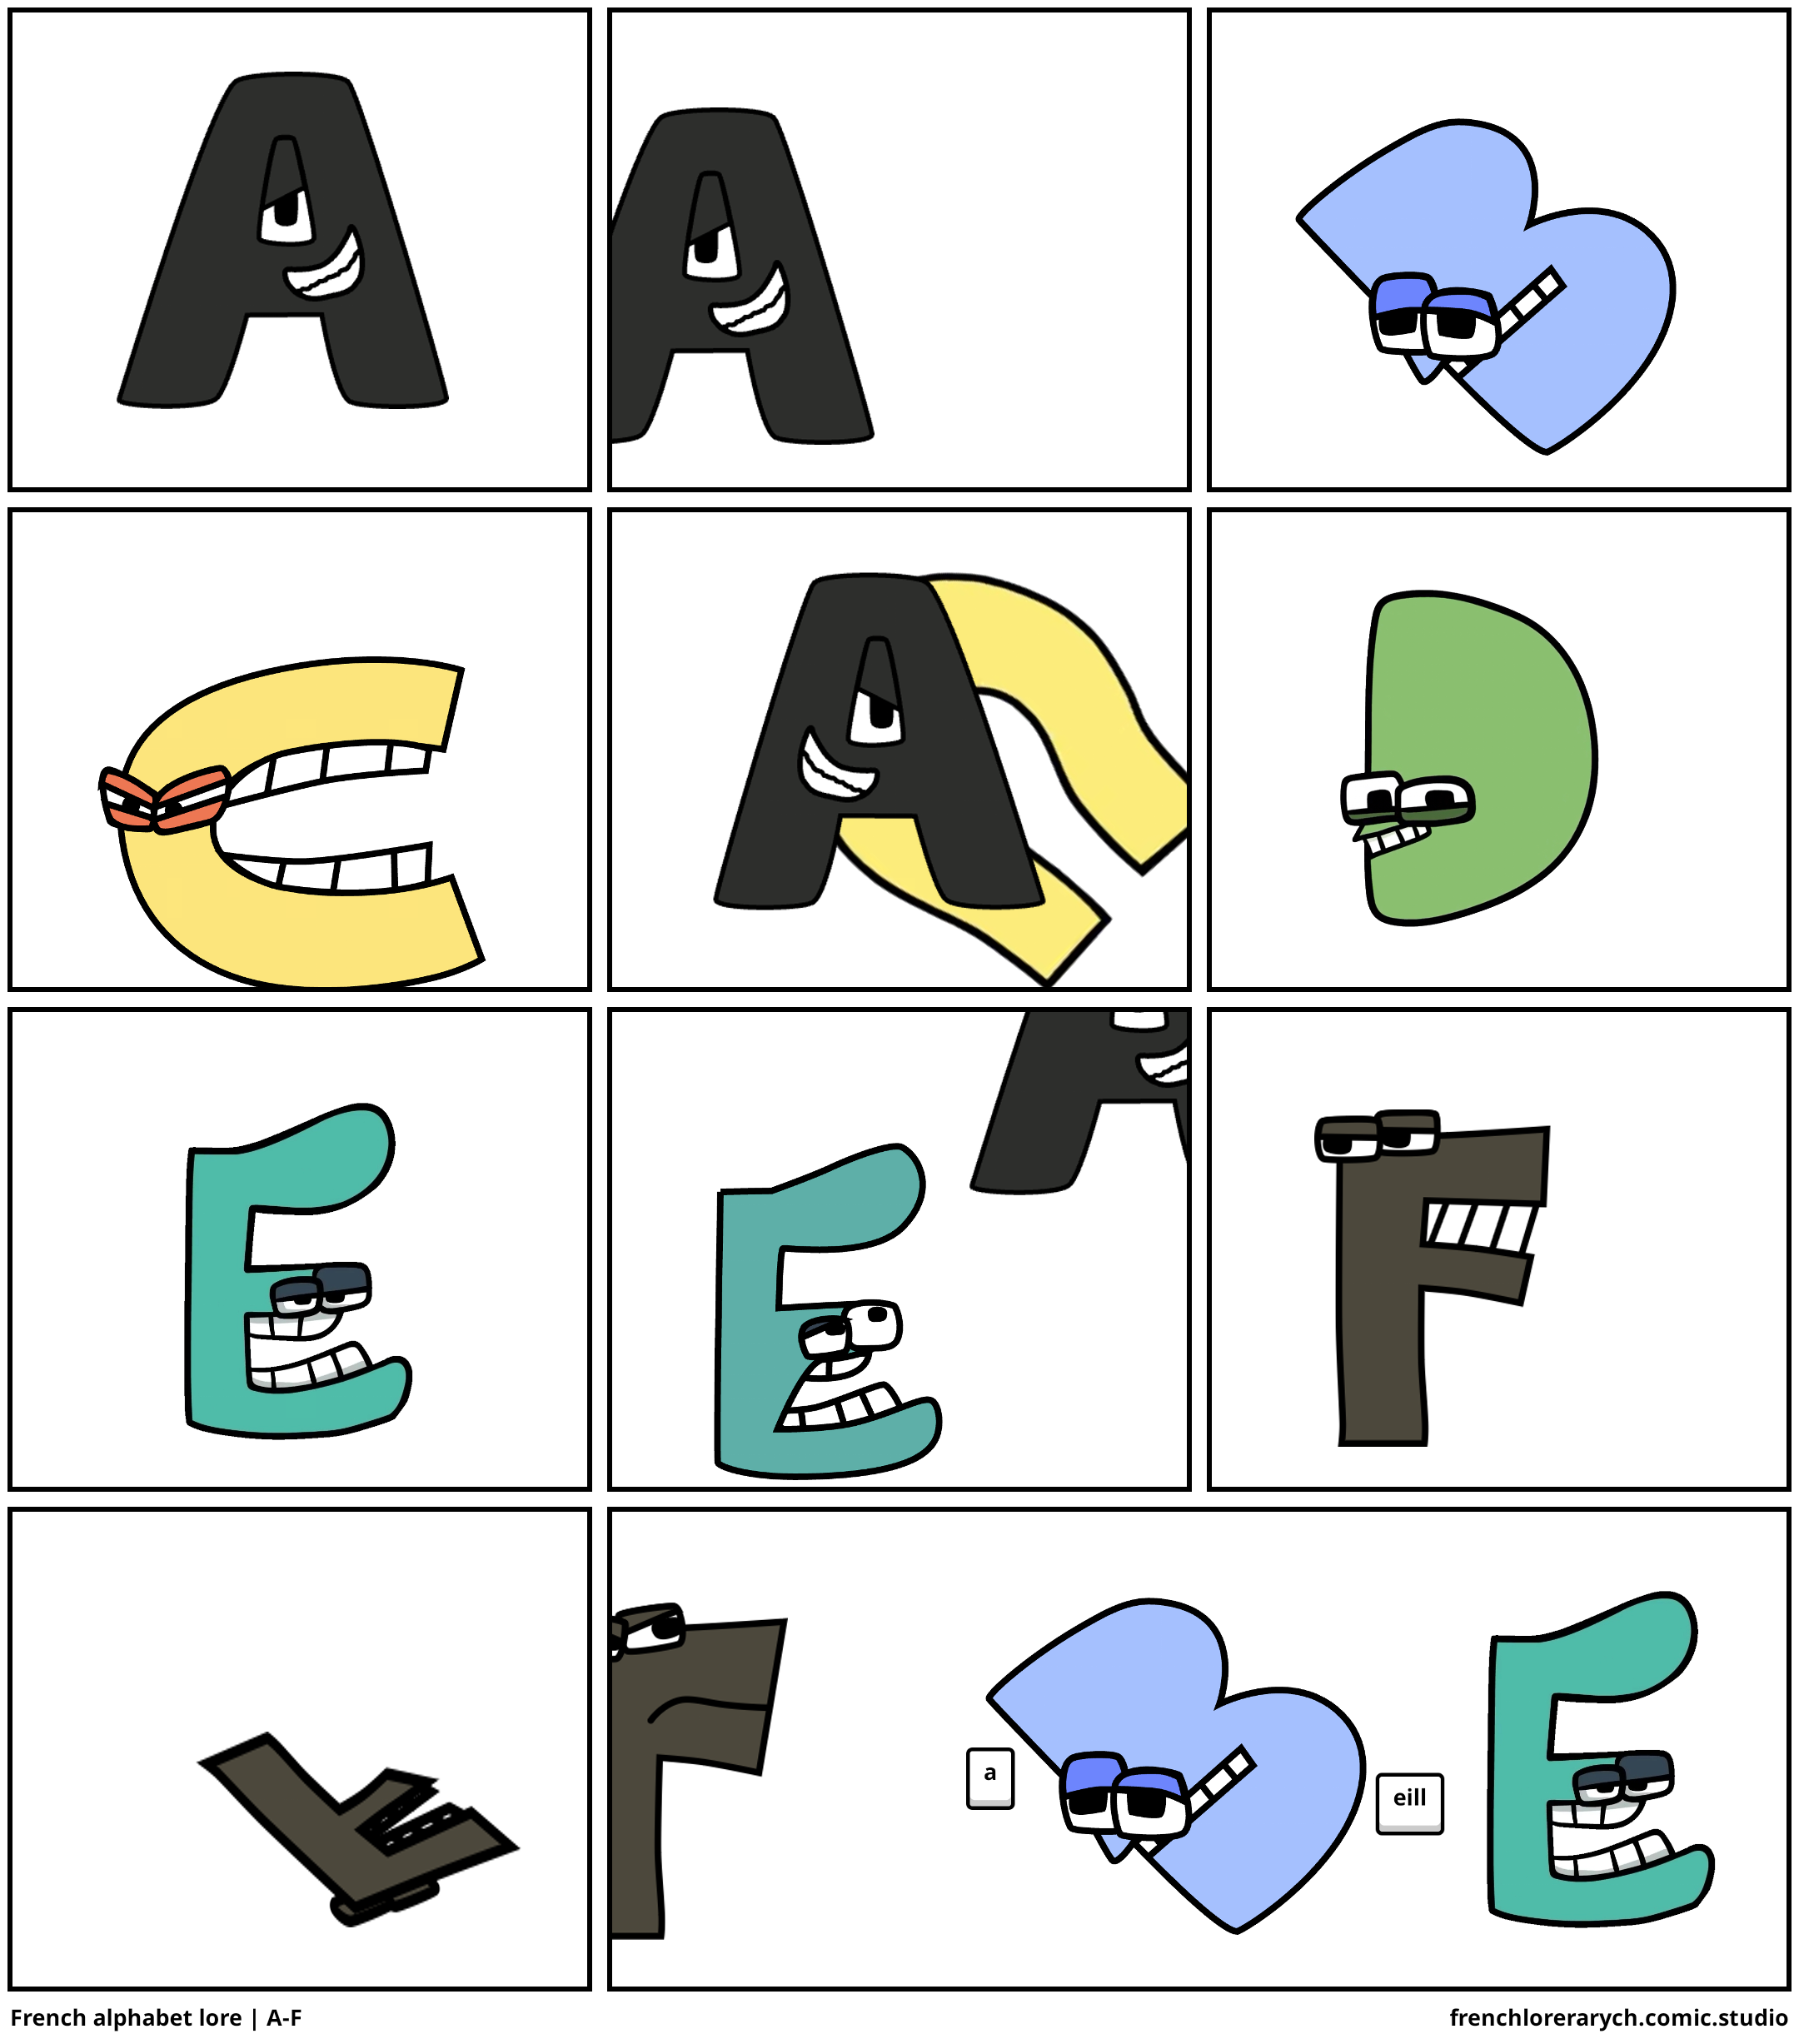 French alphabet lore | A-F